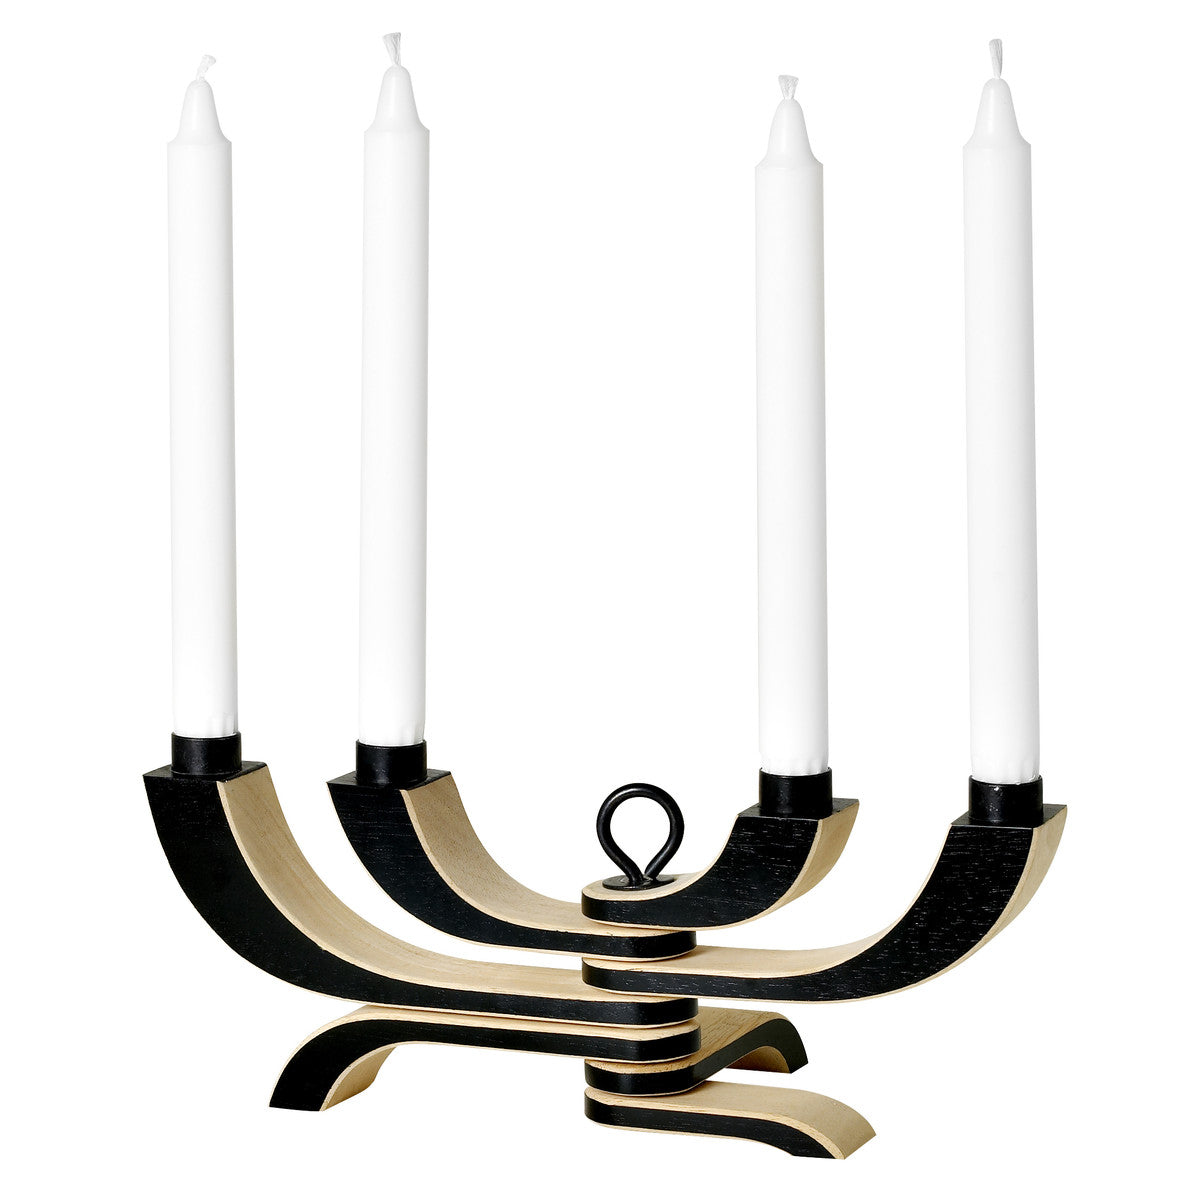 Nordic Light Candle Holder 4 Arms in Black - Blabar